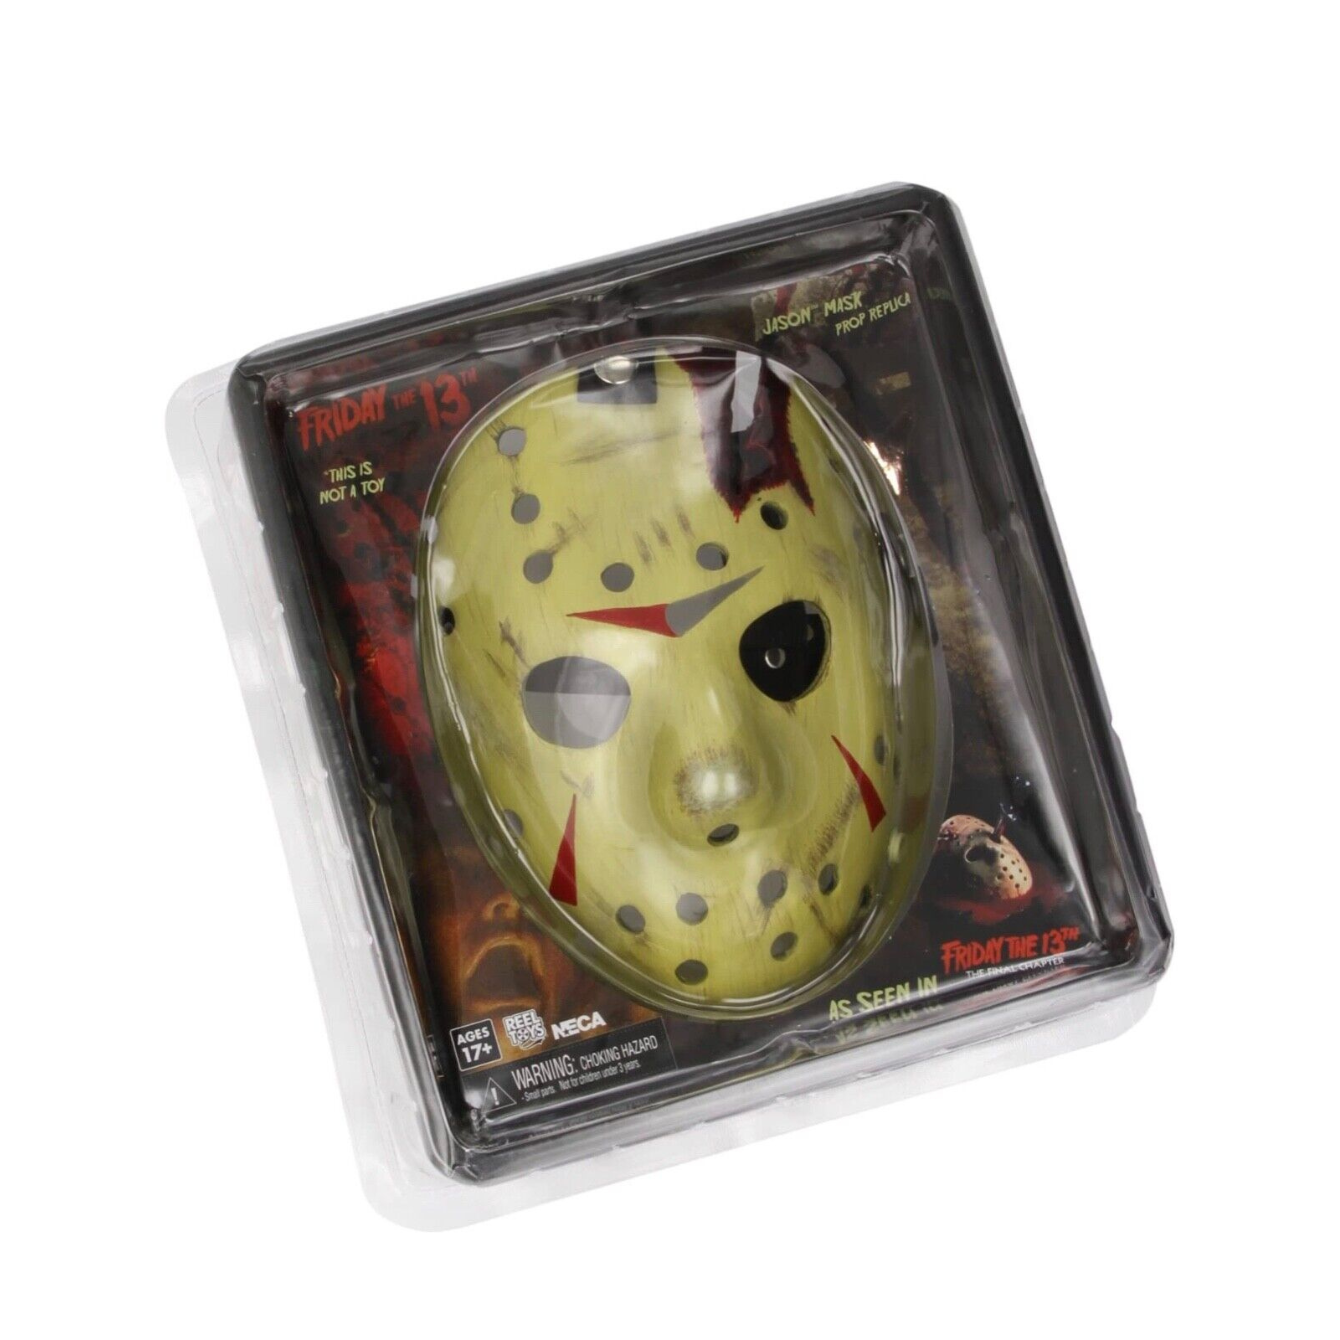 Jason Part 4 Friday the 13th Replica Mask by Neca